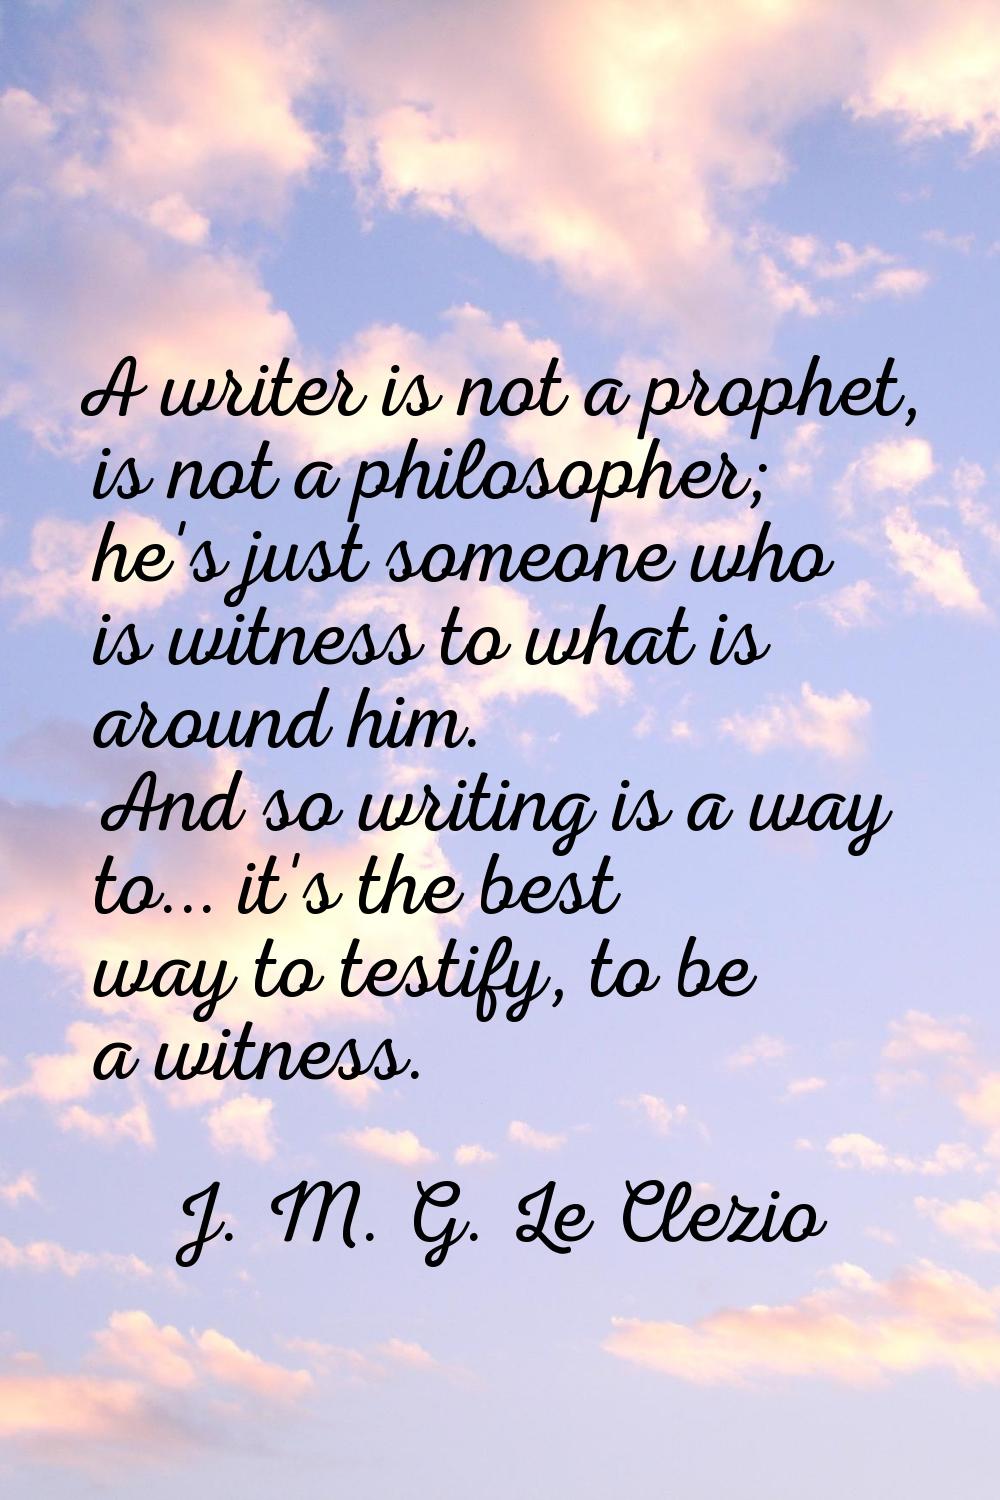 A writer is not a prophet, is not a philosopher; he's just someone who is witness to what is around